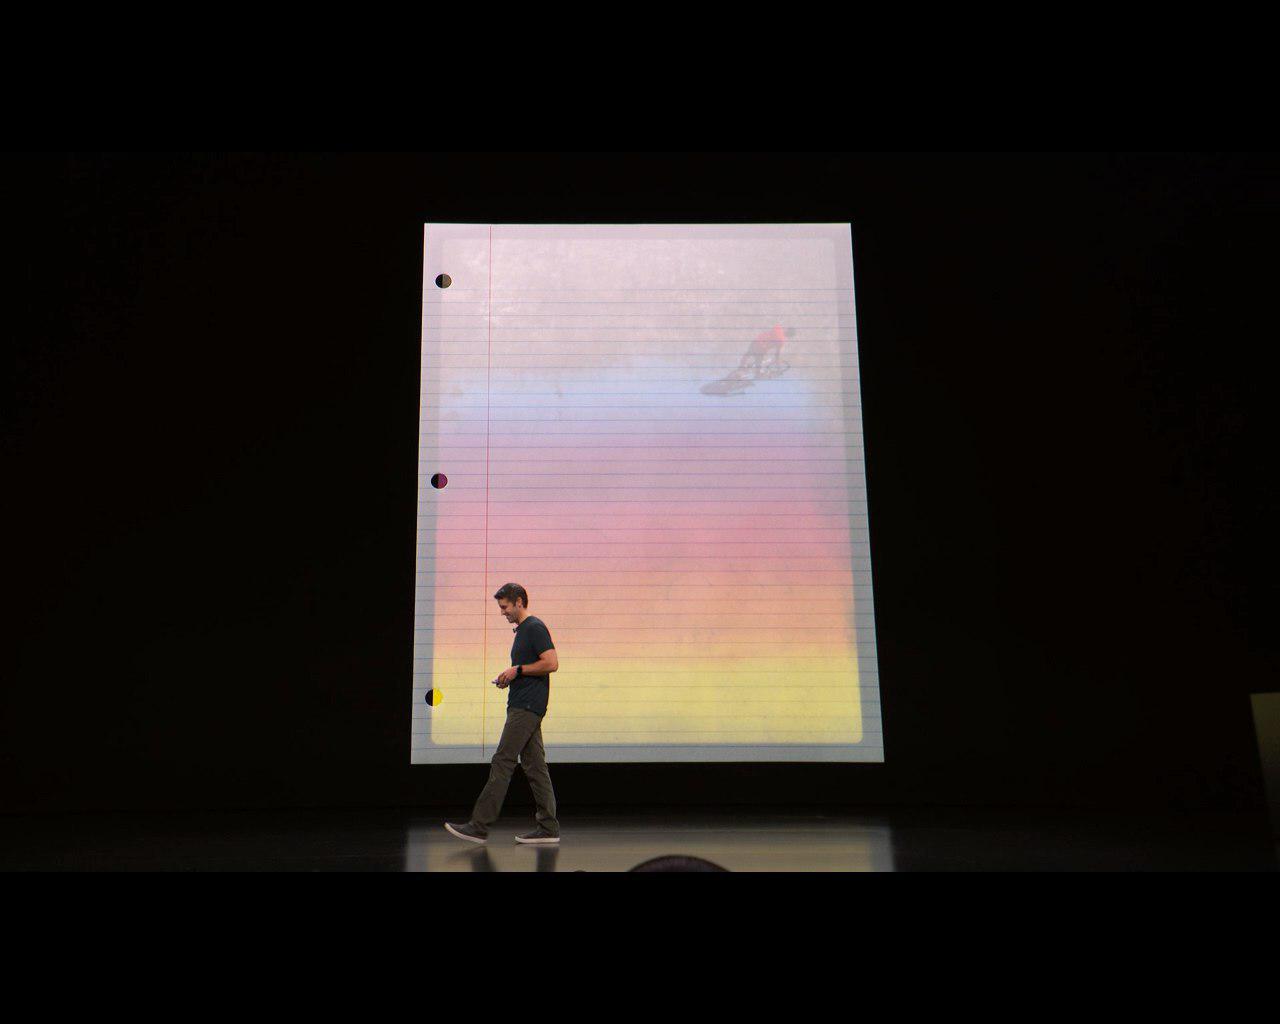 Apple introduced incredibly powerful iPad Pro 